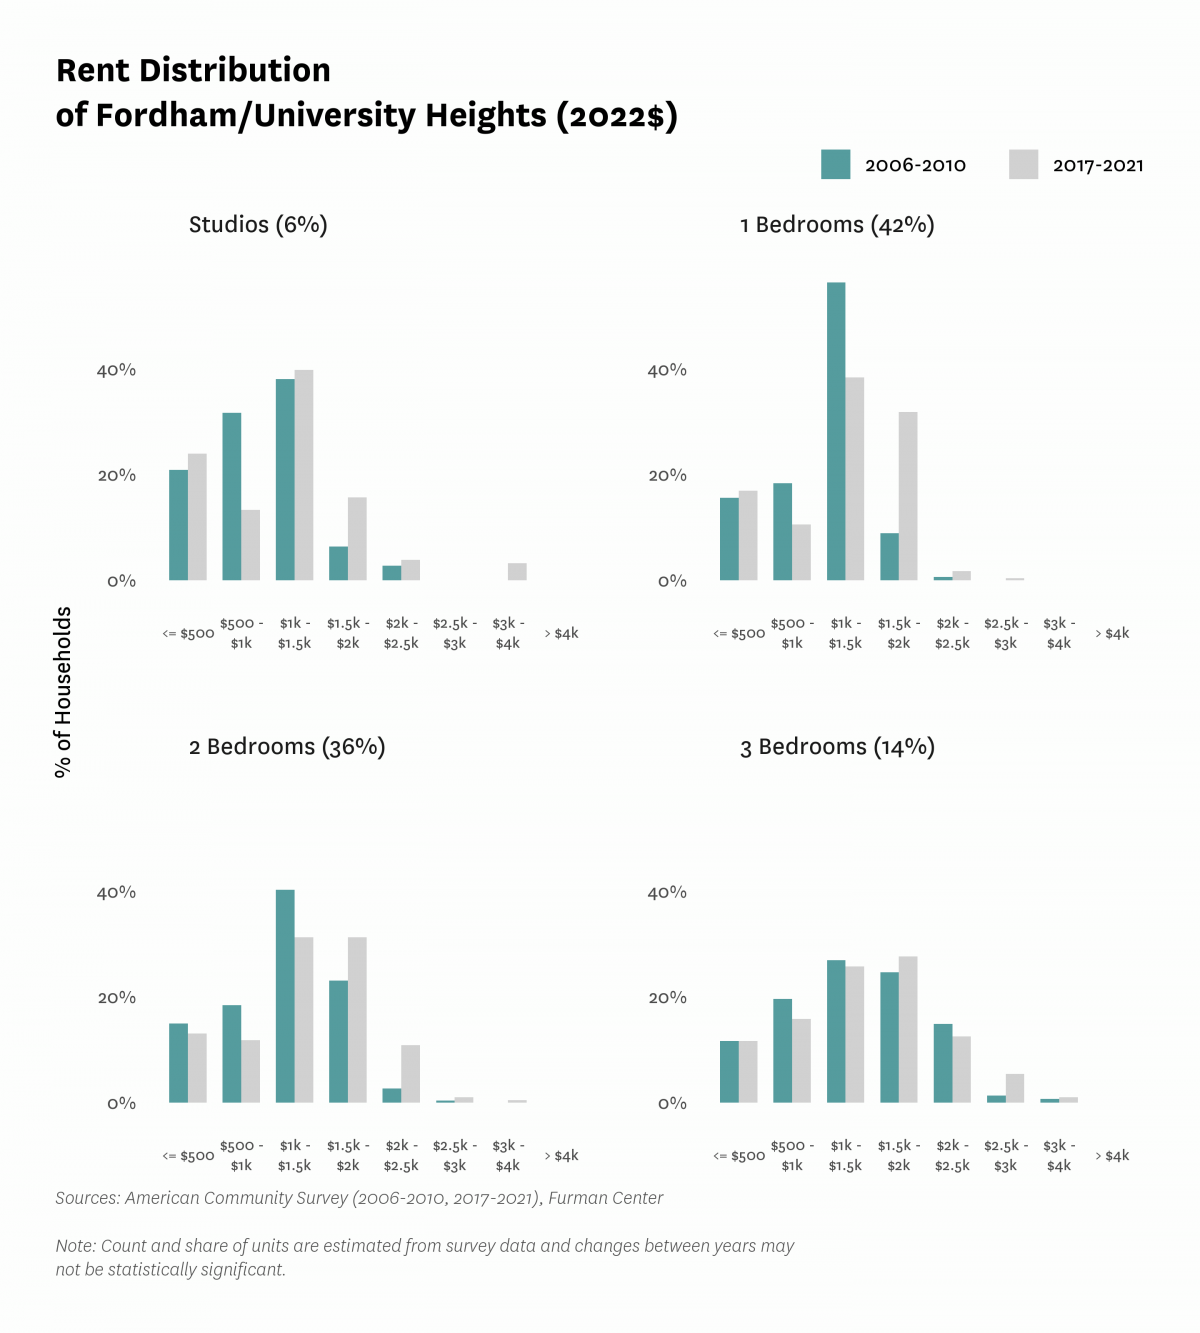 Graph showing the distribution of rents in Fordham/University Heights in both 2010 and 2017-2021.